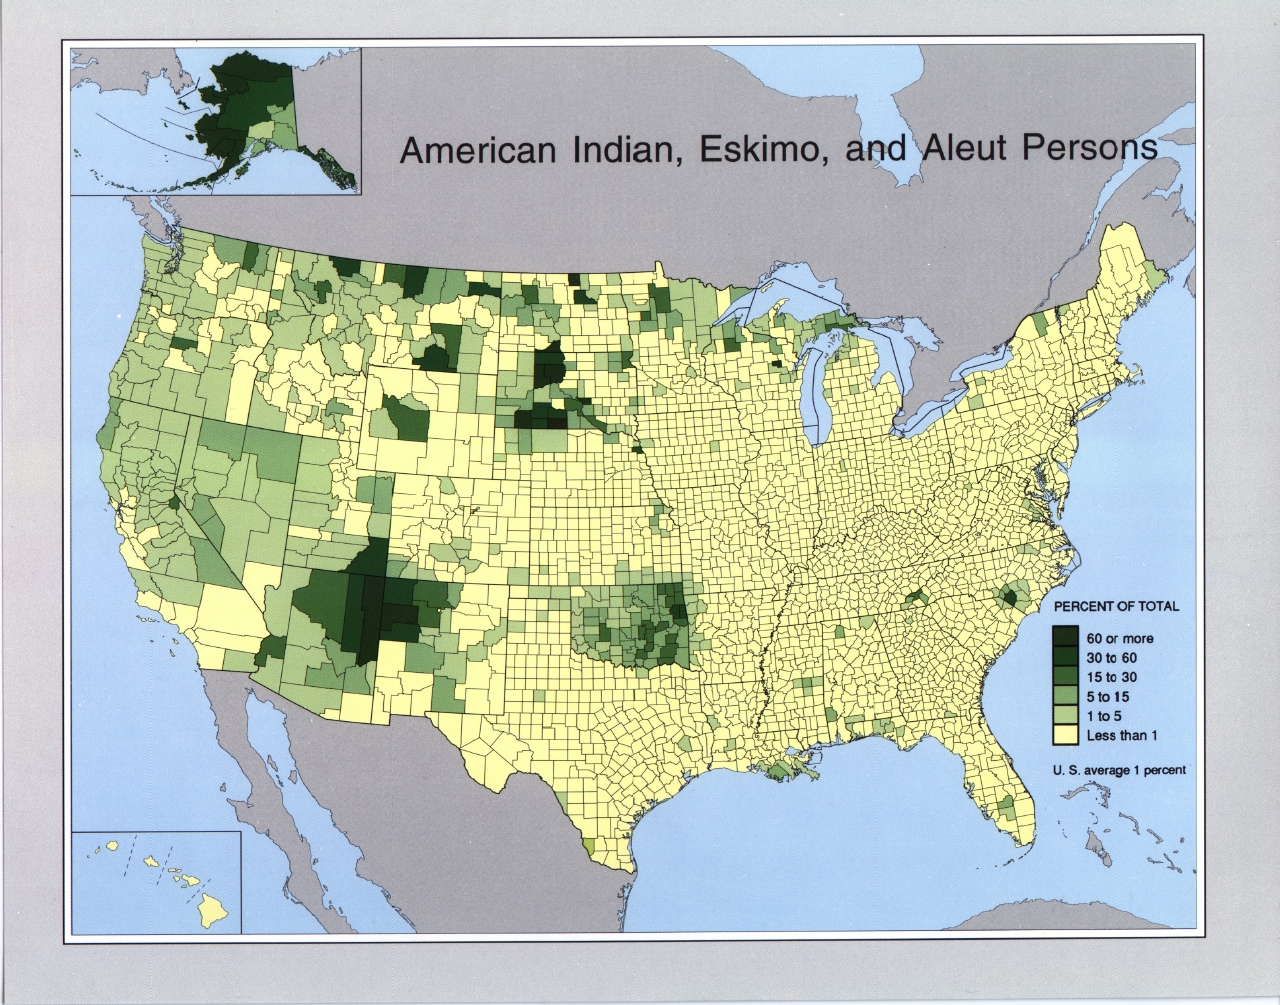  Maps of United States Of AmericaAmerican Indian, Eskimo and Aleut Persons 1990 (1.17MB) 